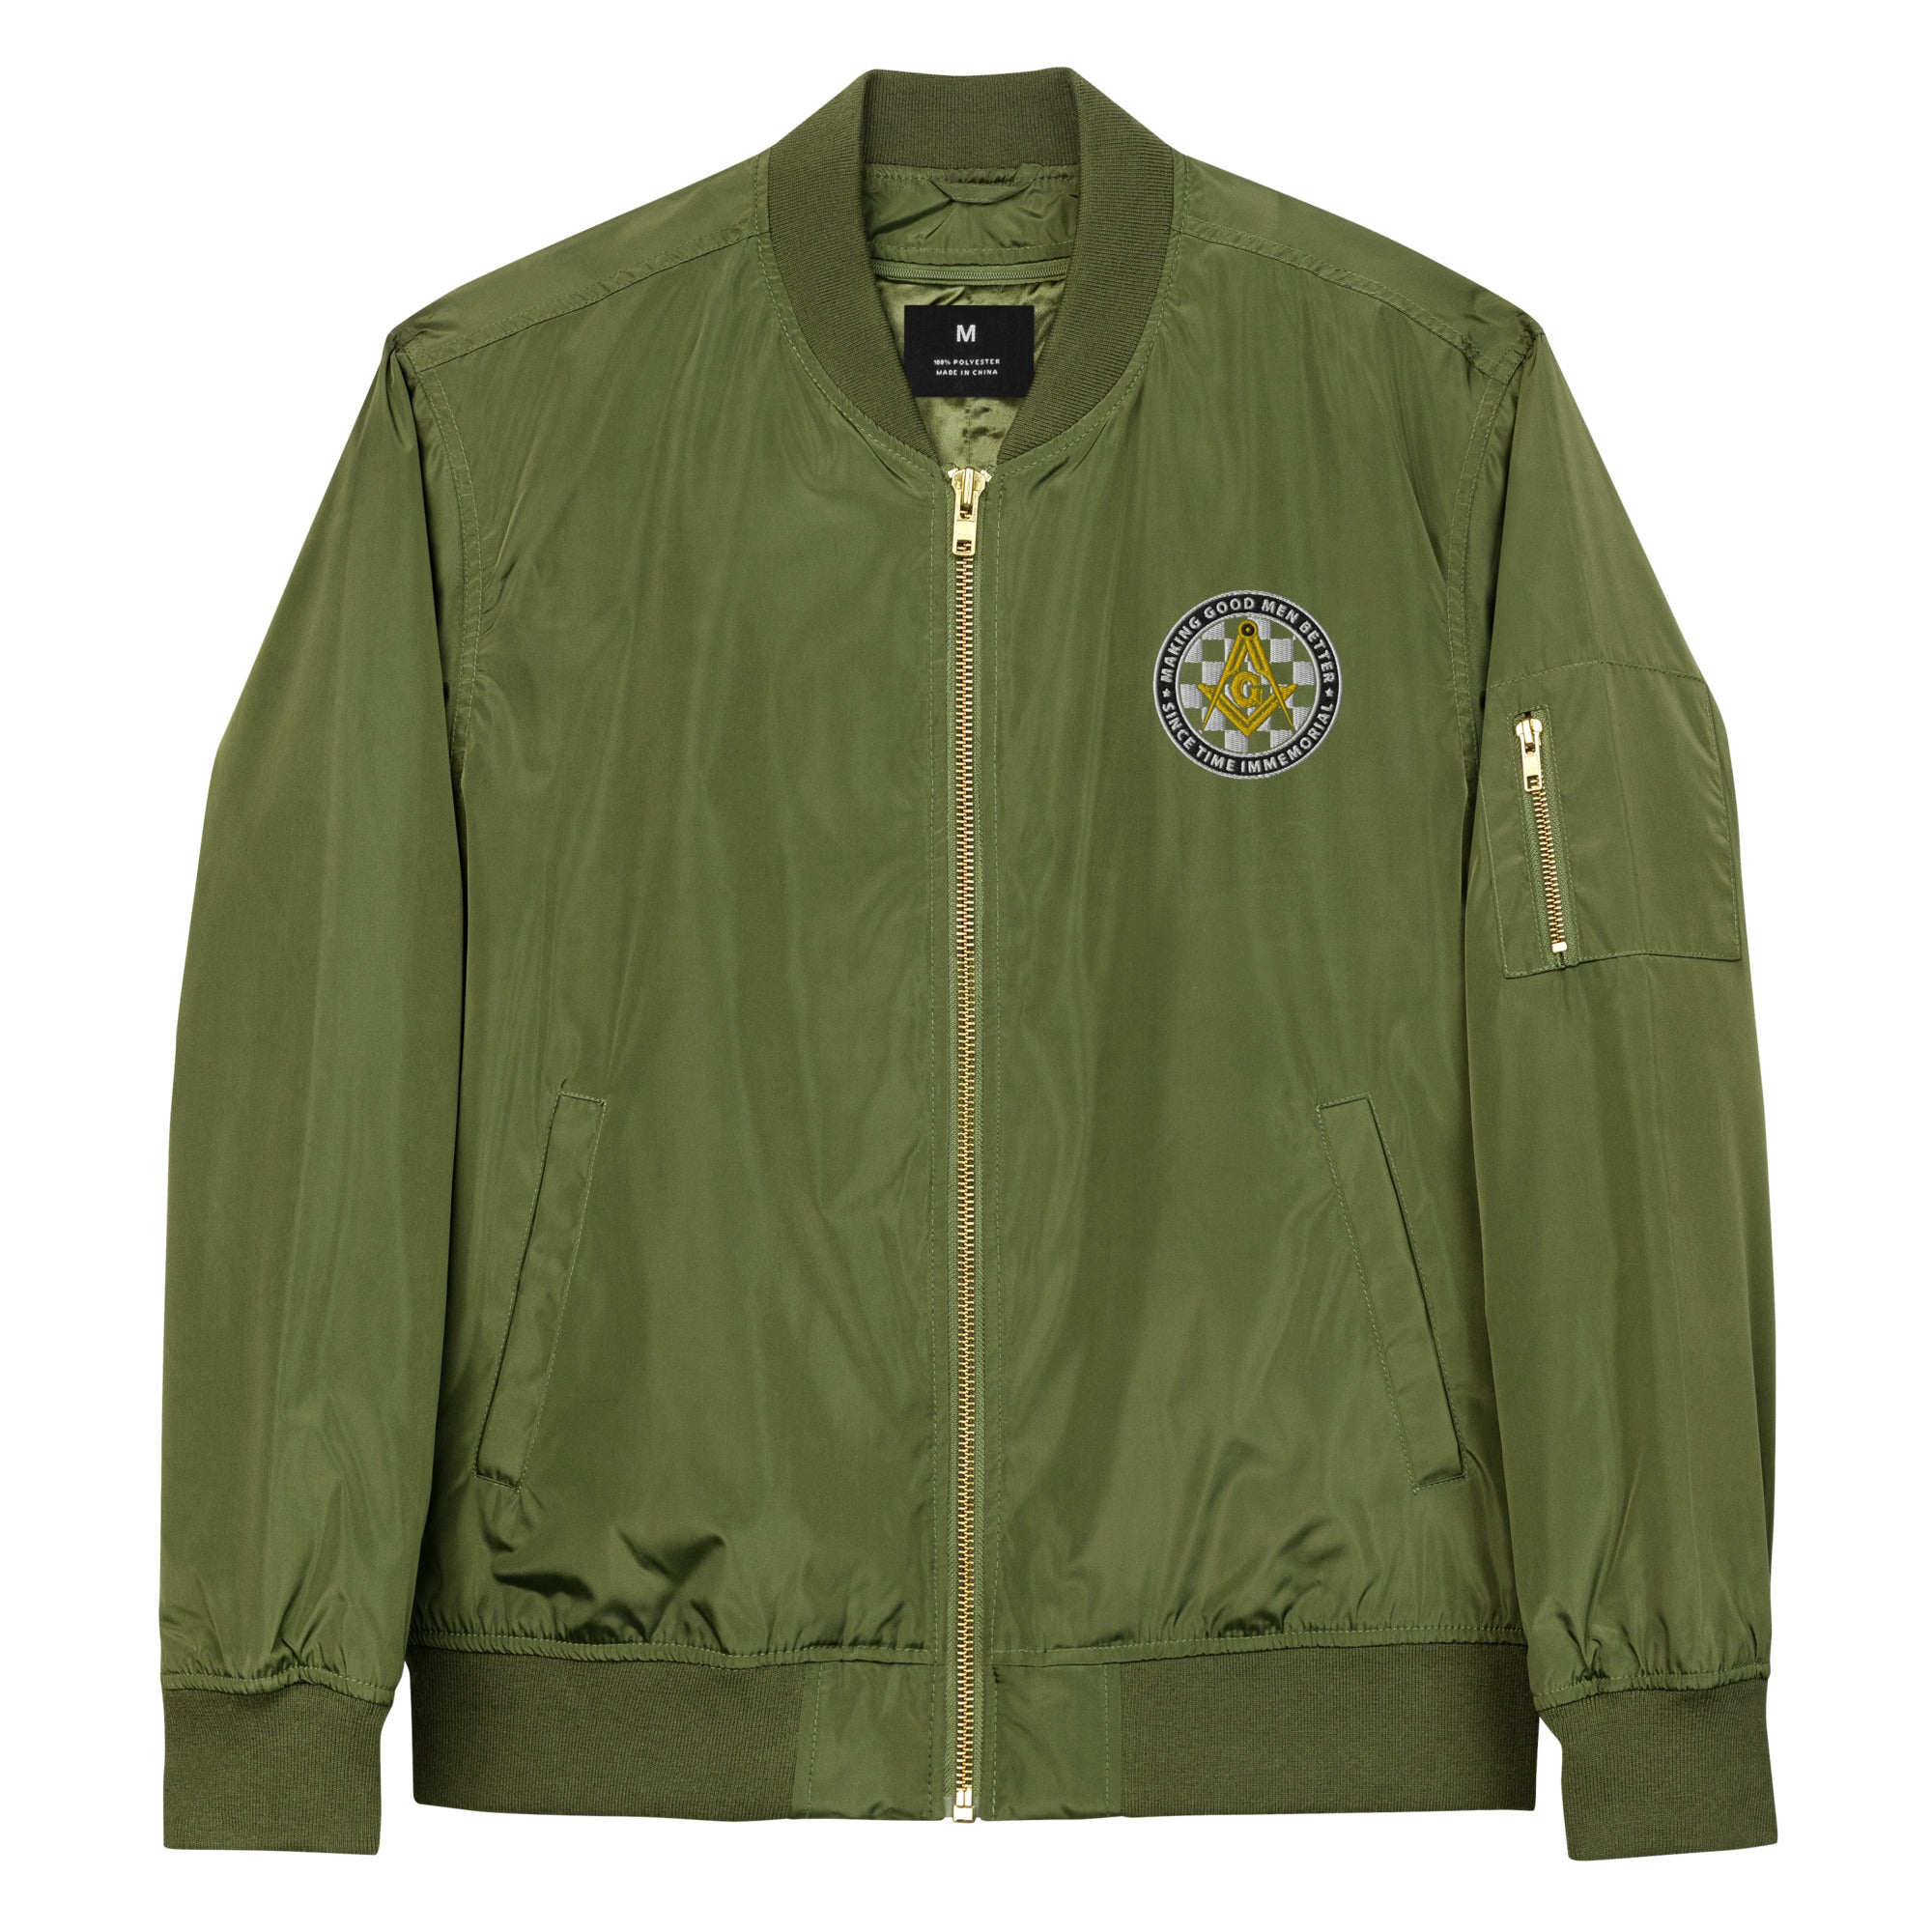 MGMB Premium recycled bomber jacket